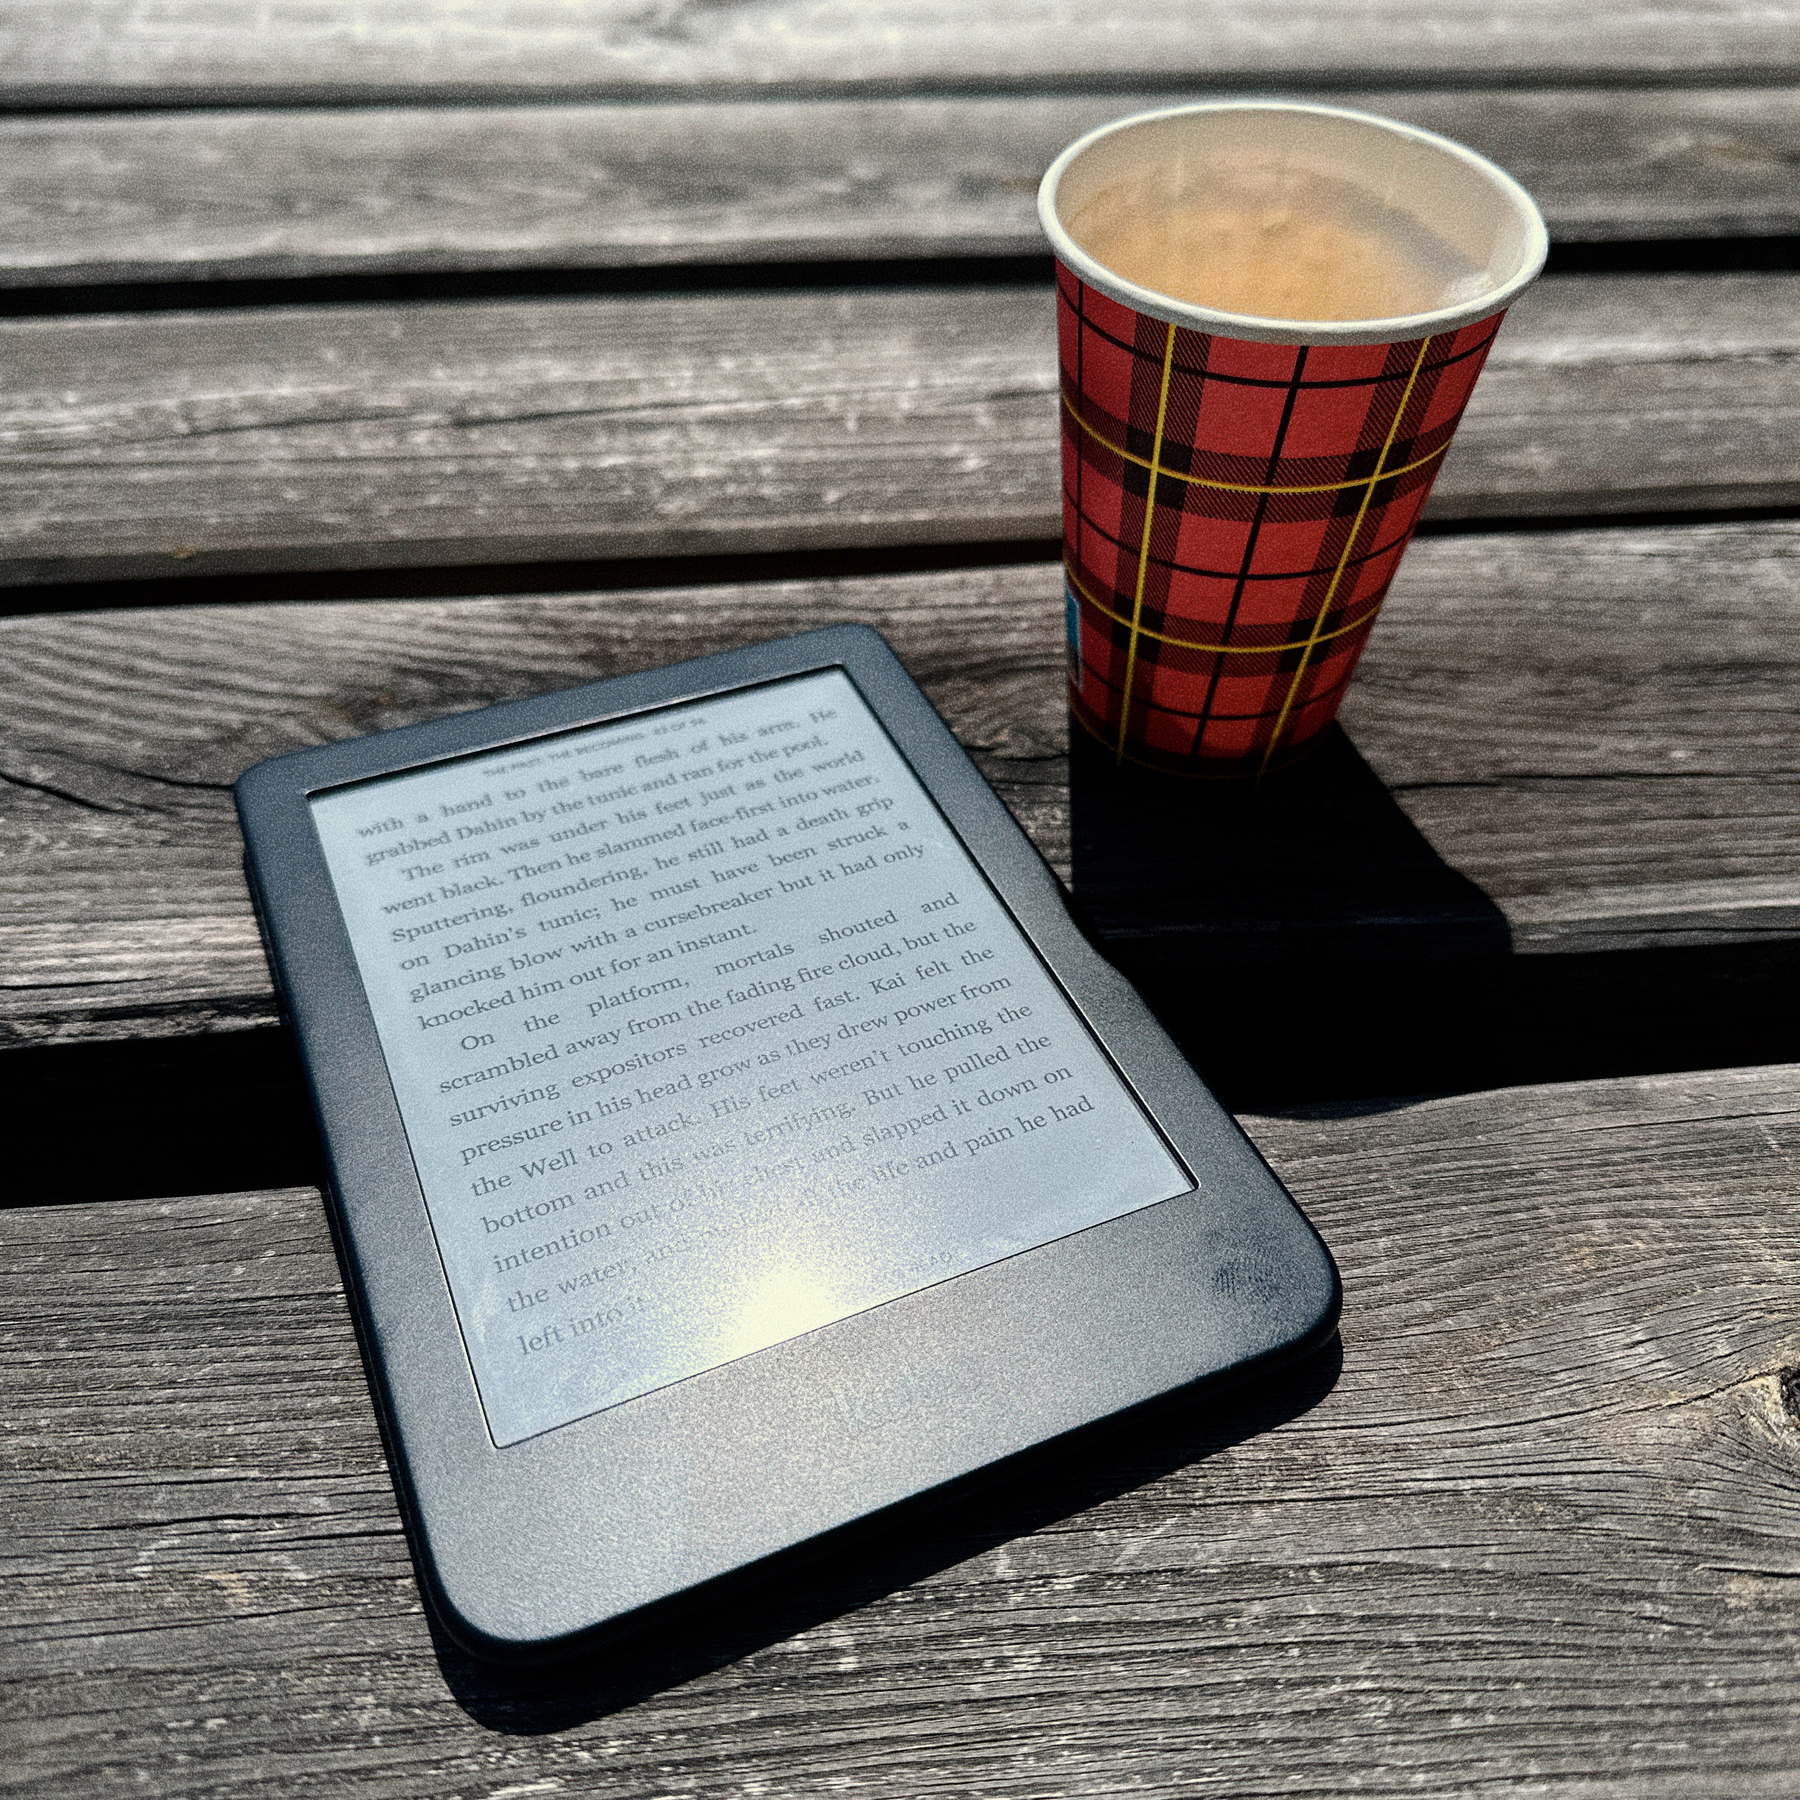 Kobo e-reader and a coffee on a wooden table. 